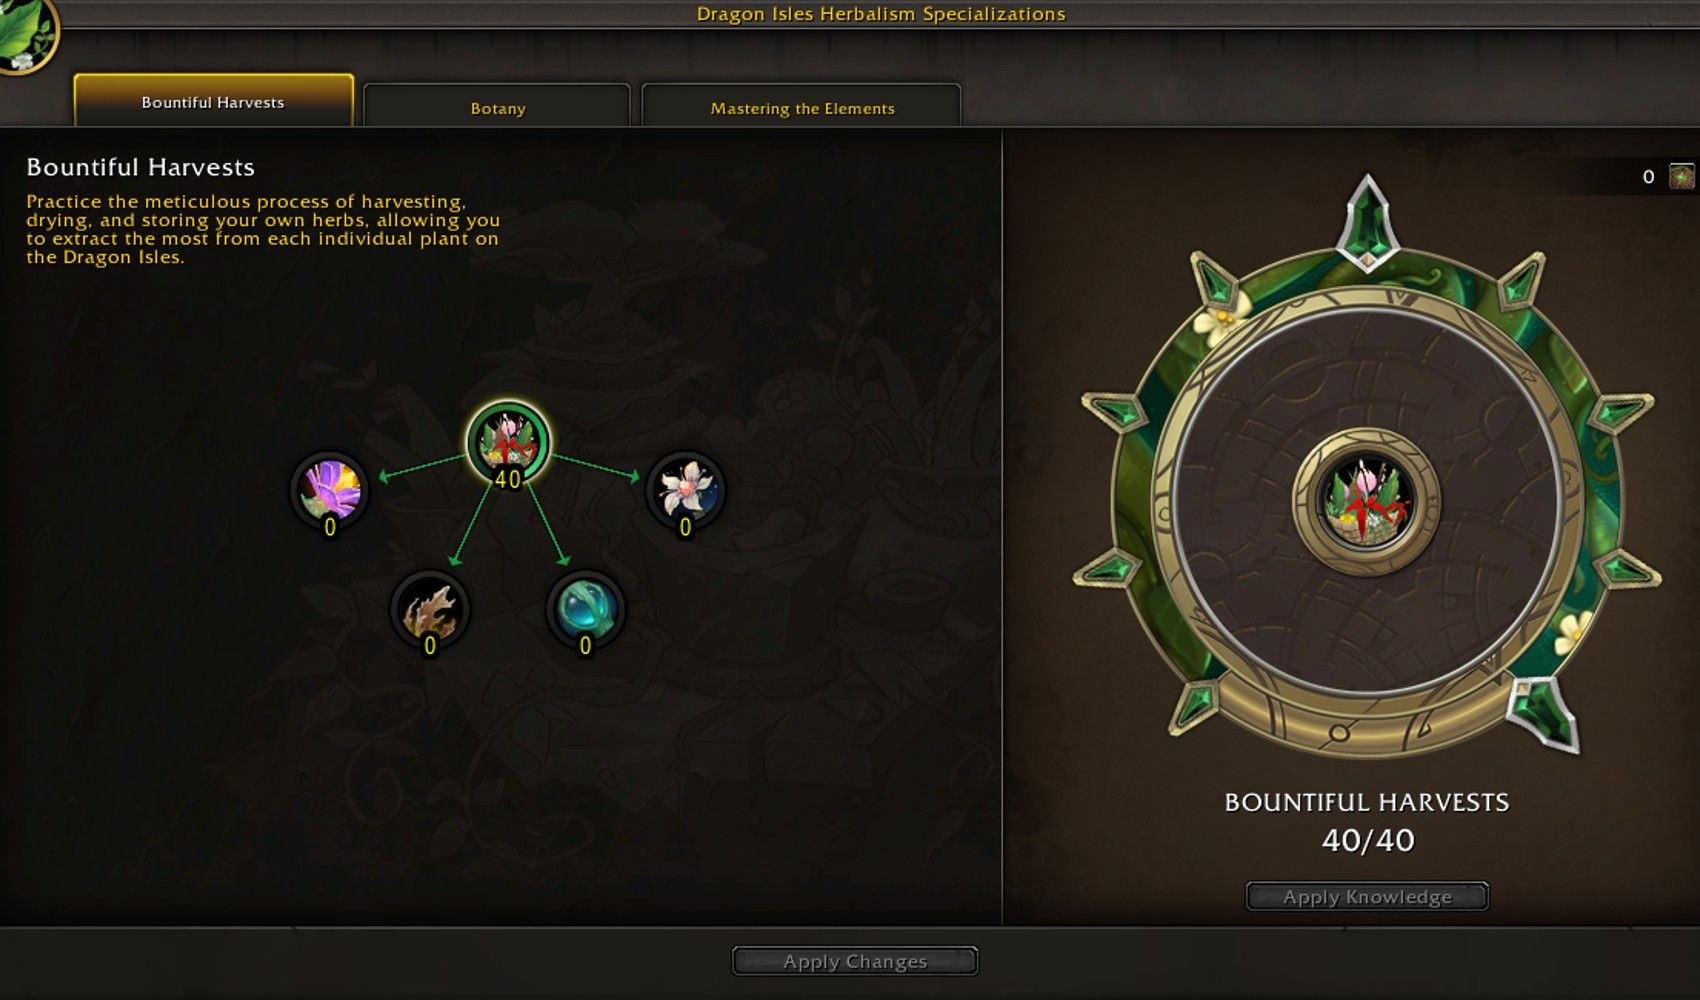 An overview of the herbalism specialization screen in World of Warcraft.